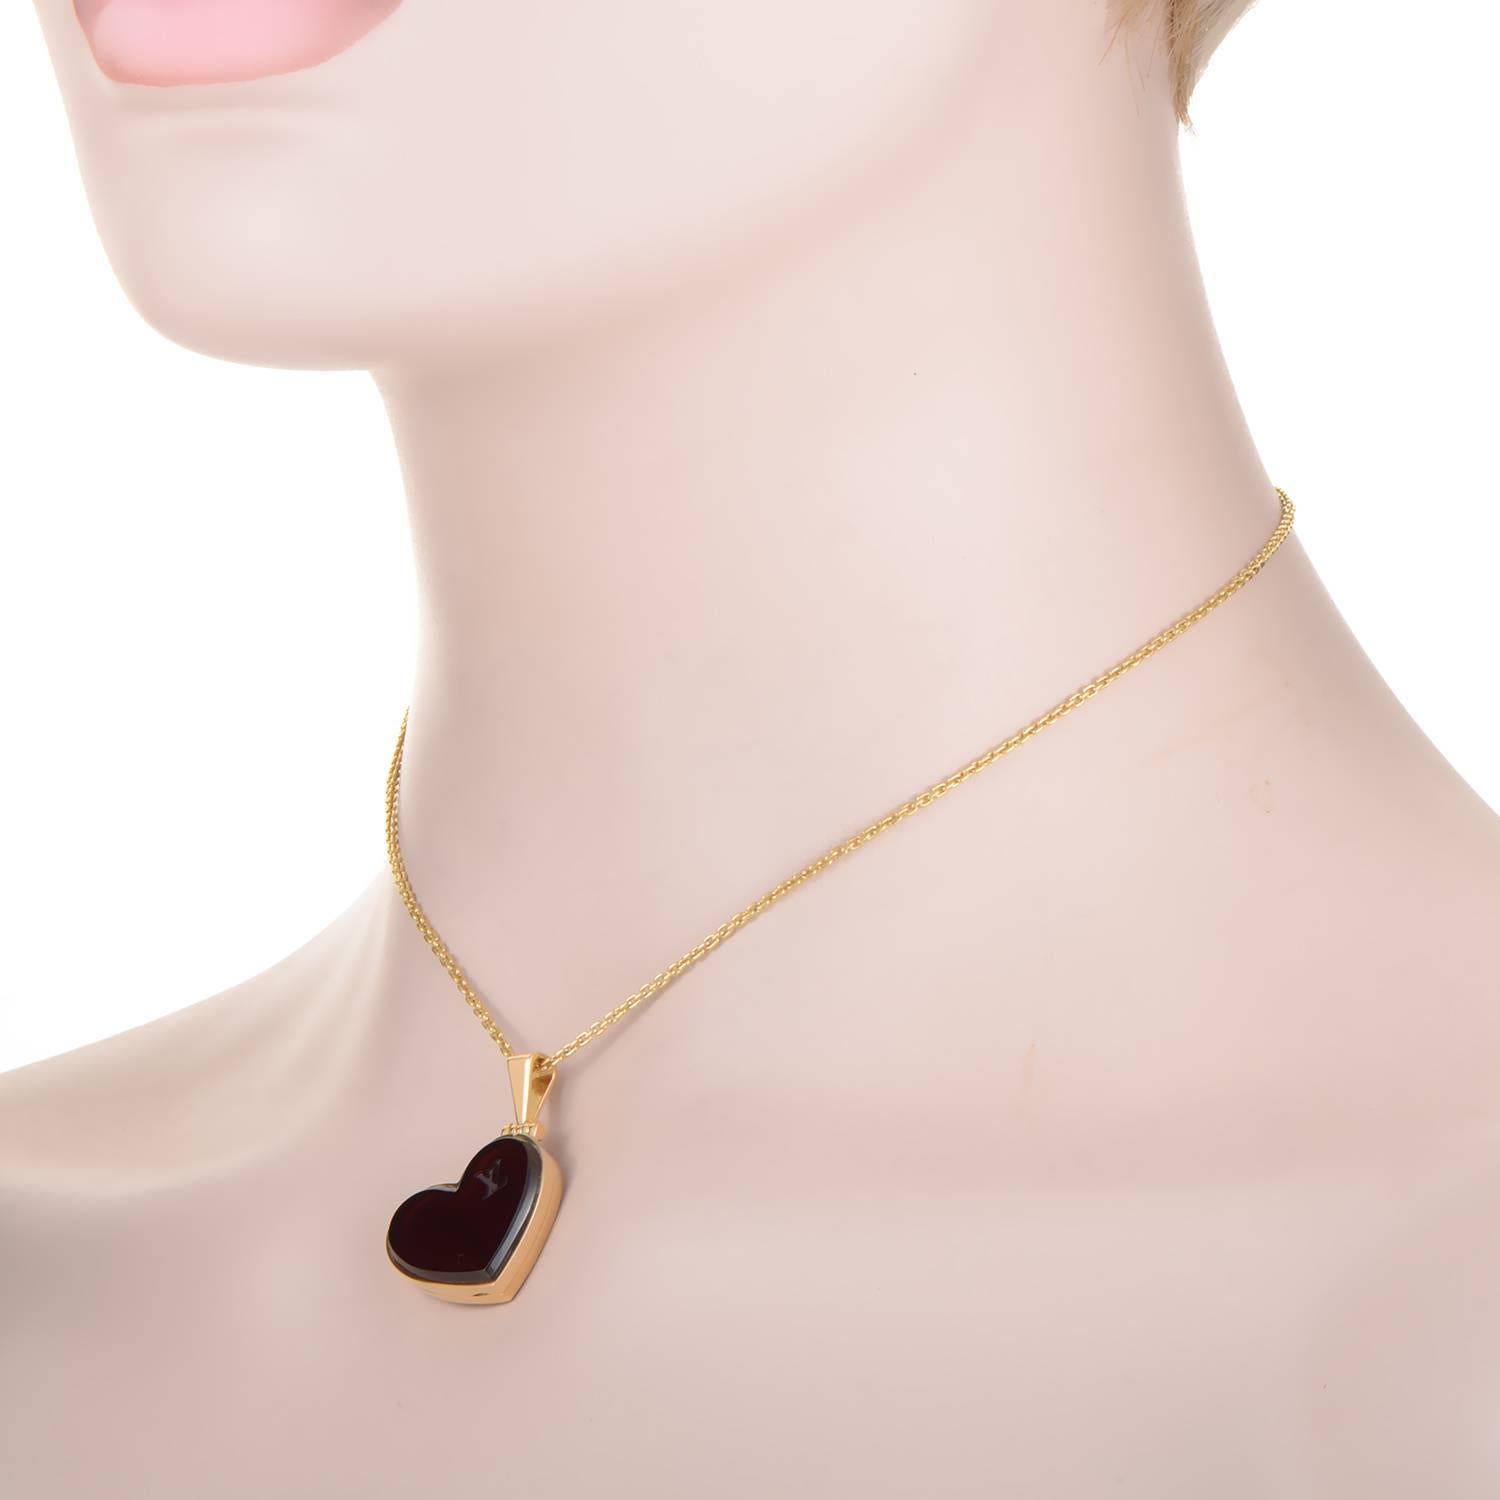 Louis Vuitton provides a deeply romantic and mesmerizing piece of jewelry in the form of this Merlot red garnet locket. The delicate rolo necklace in 18K gold gleams as it holds the 1/32